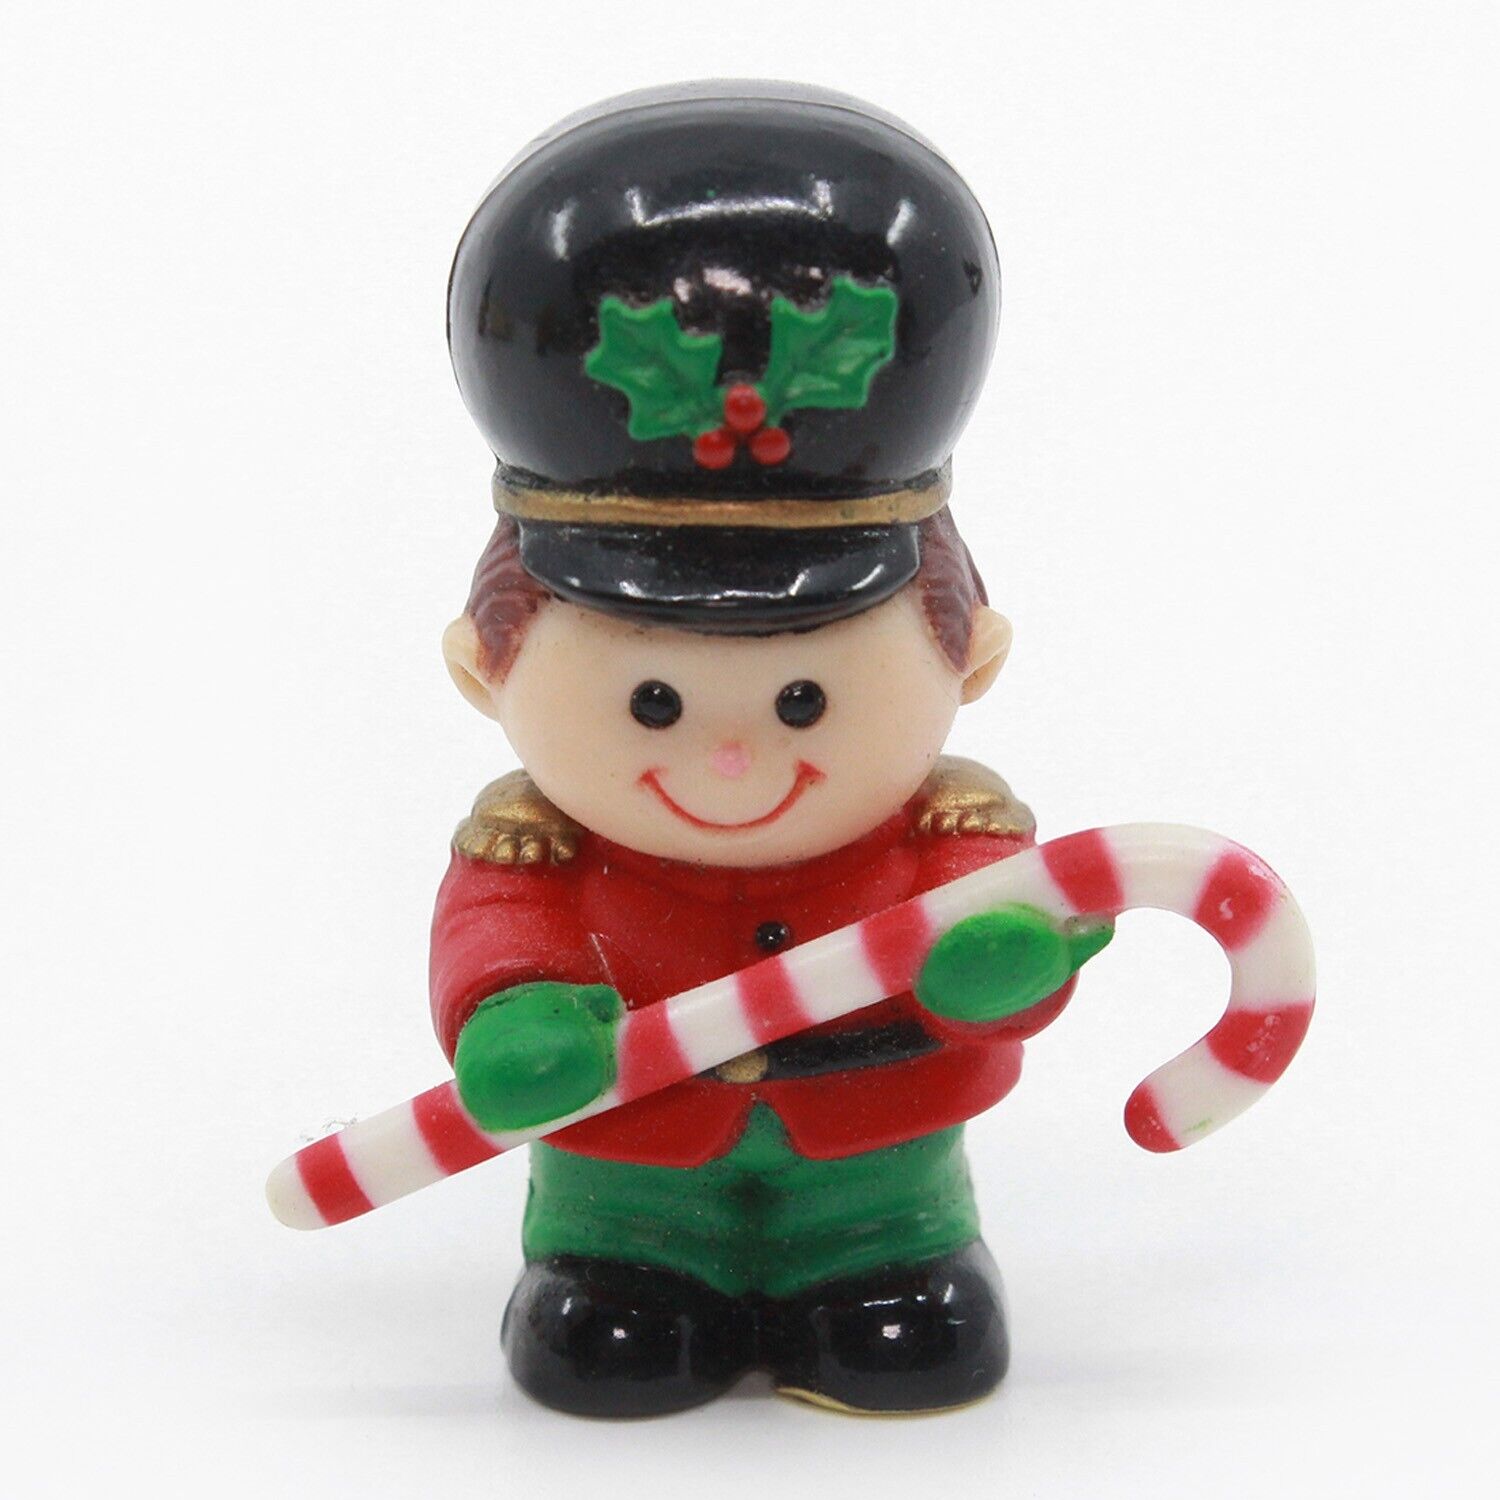 ROYAL GUARD with Candy Cane - Russ Berrie Miniature Christmas Figure